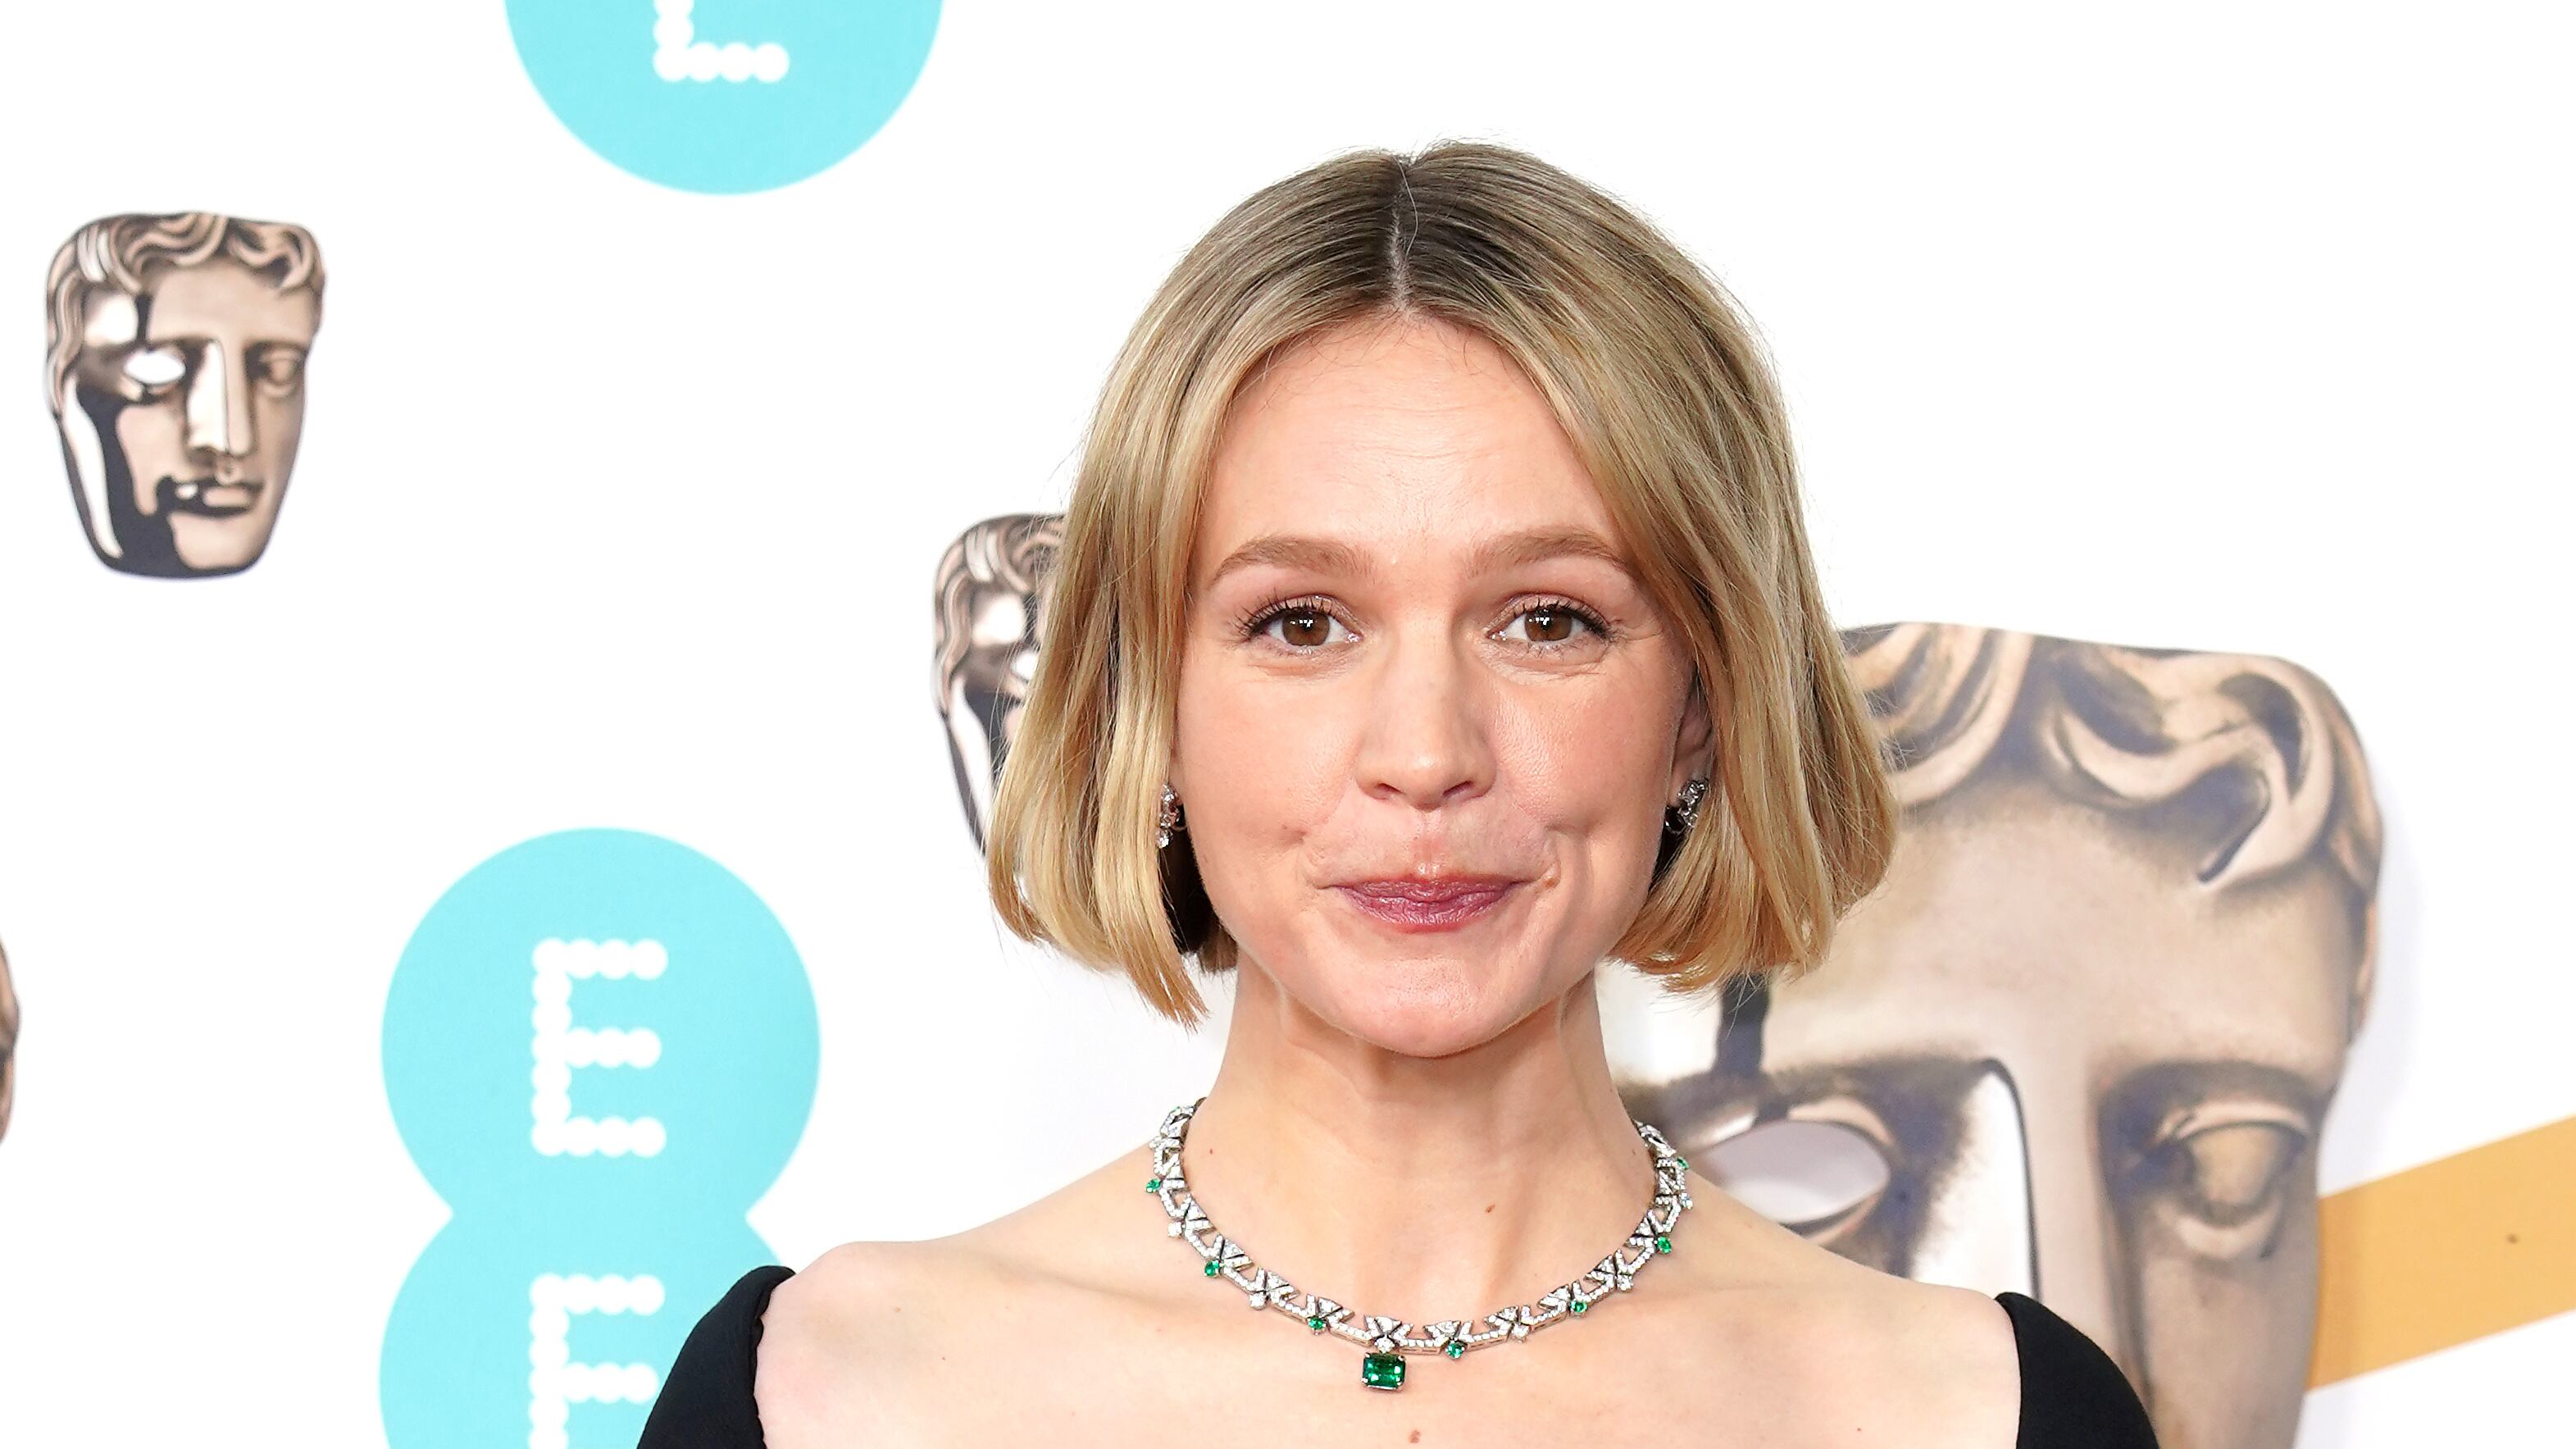 Carey Mulligan is among a list of stars who have signed an open letter calling for the creation of the Creative Industries Independent Standards Authority